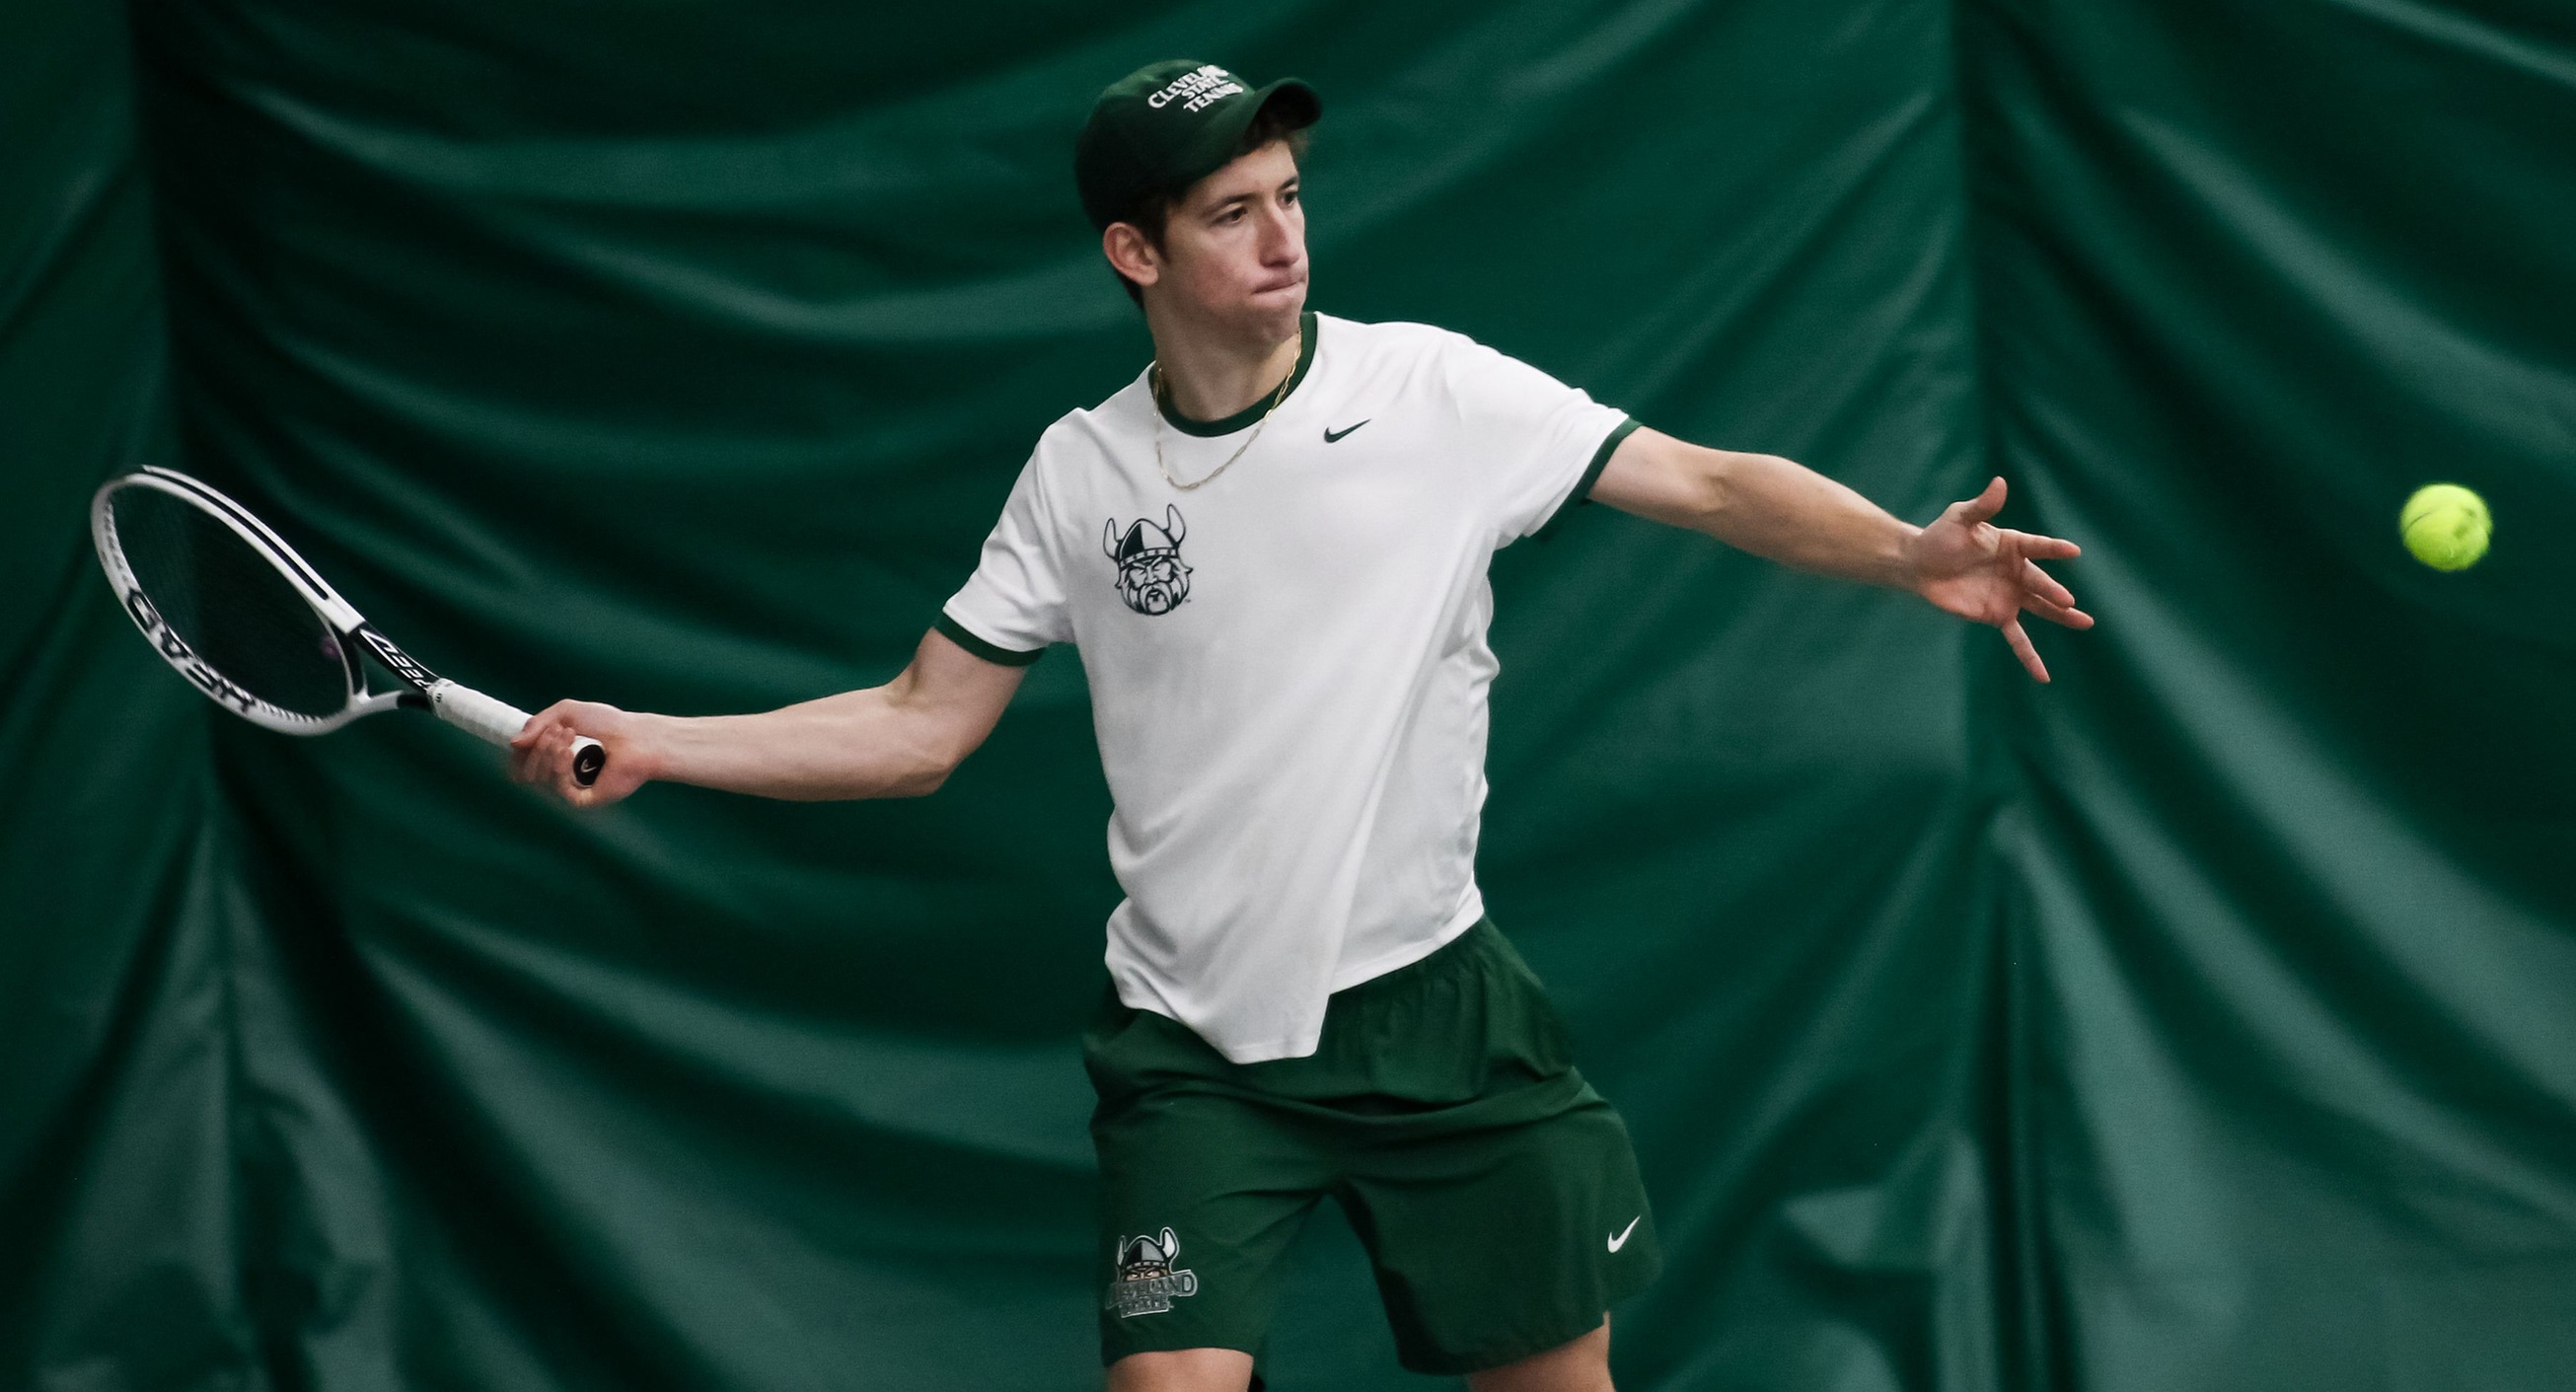 Cleveland State Men’s Tennis Returns To Action At ITA Midwest Regional